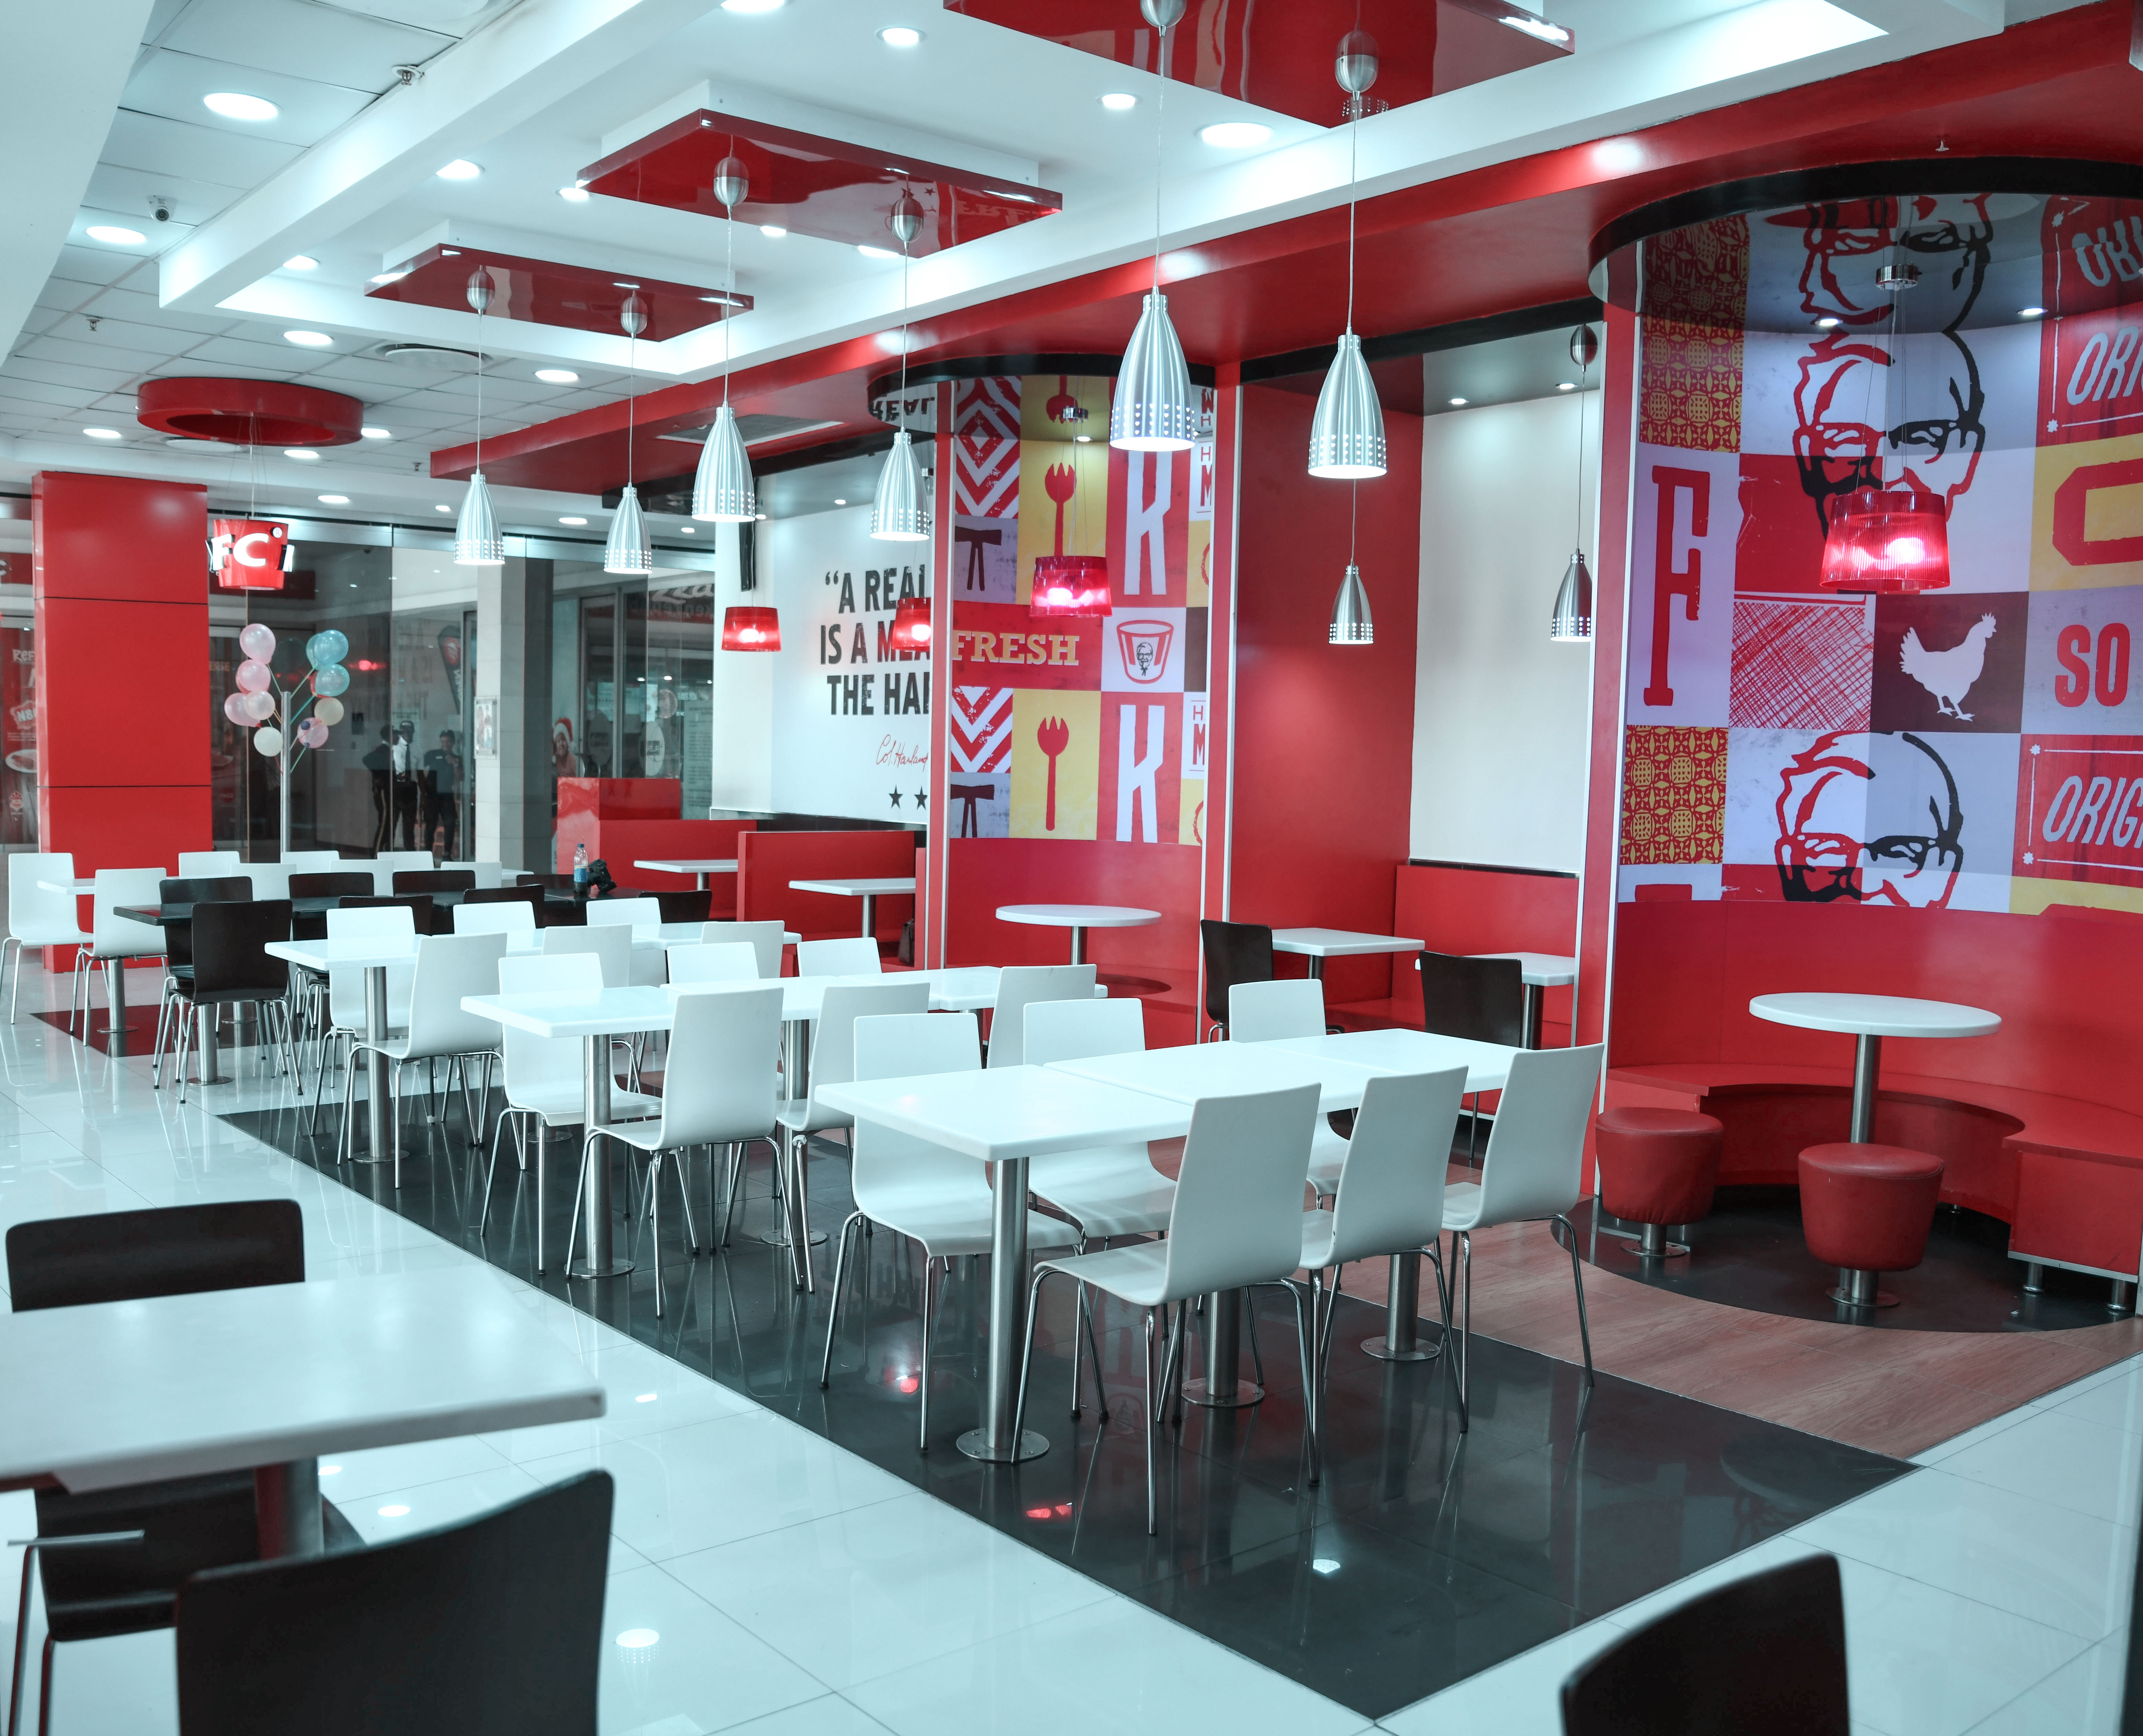 #WeLoveTheNewKFC: The KFC outlet at Ikeja City Mall is starting the year with a big bang!